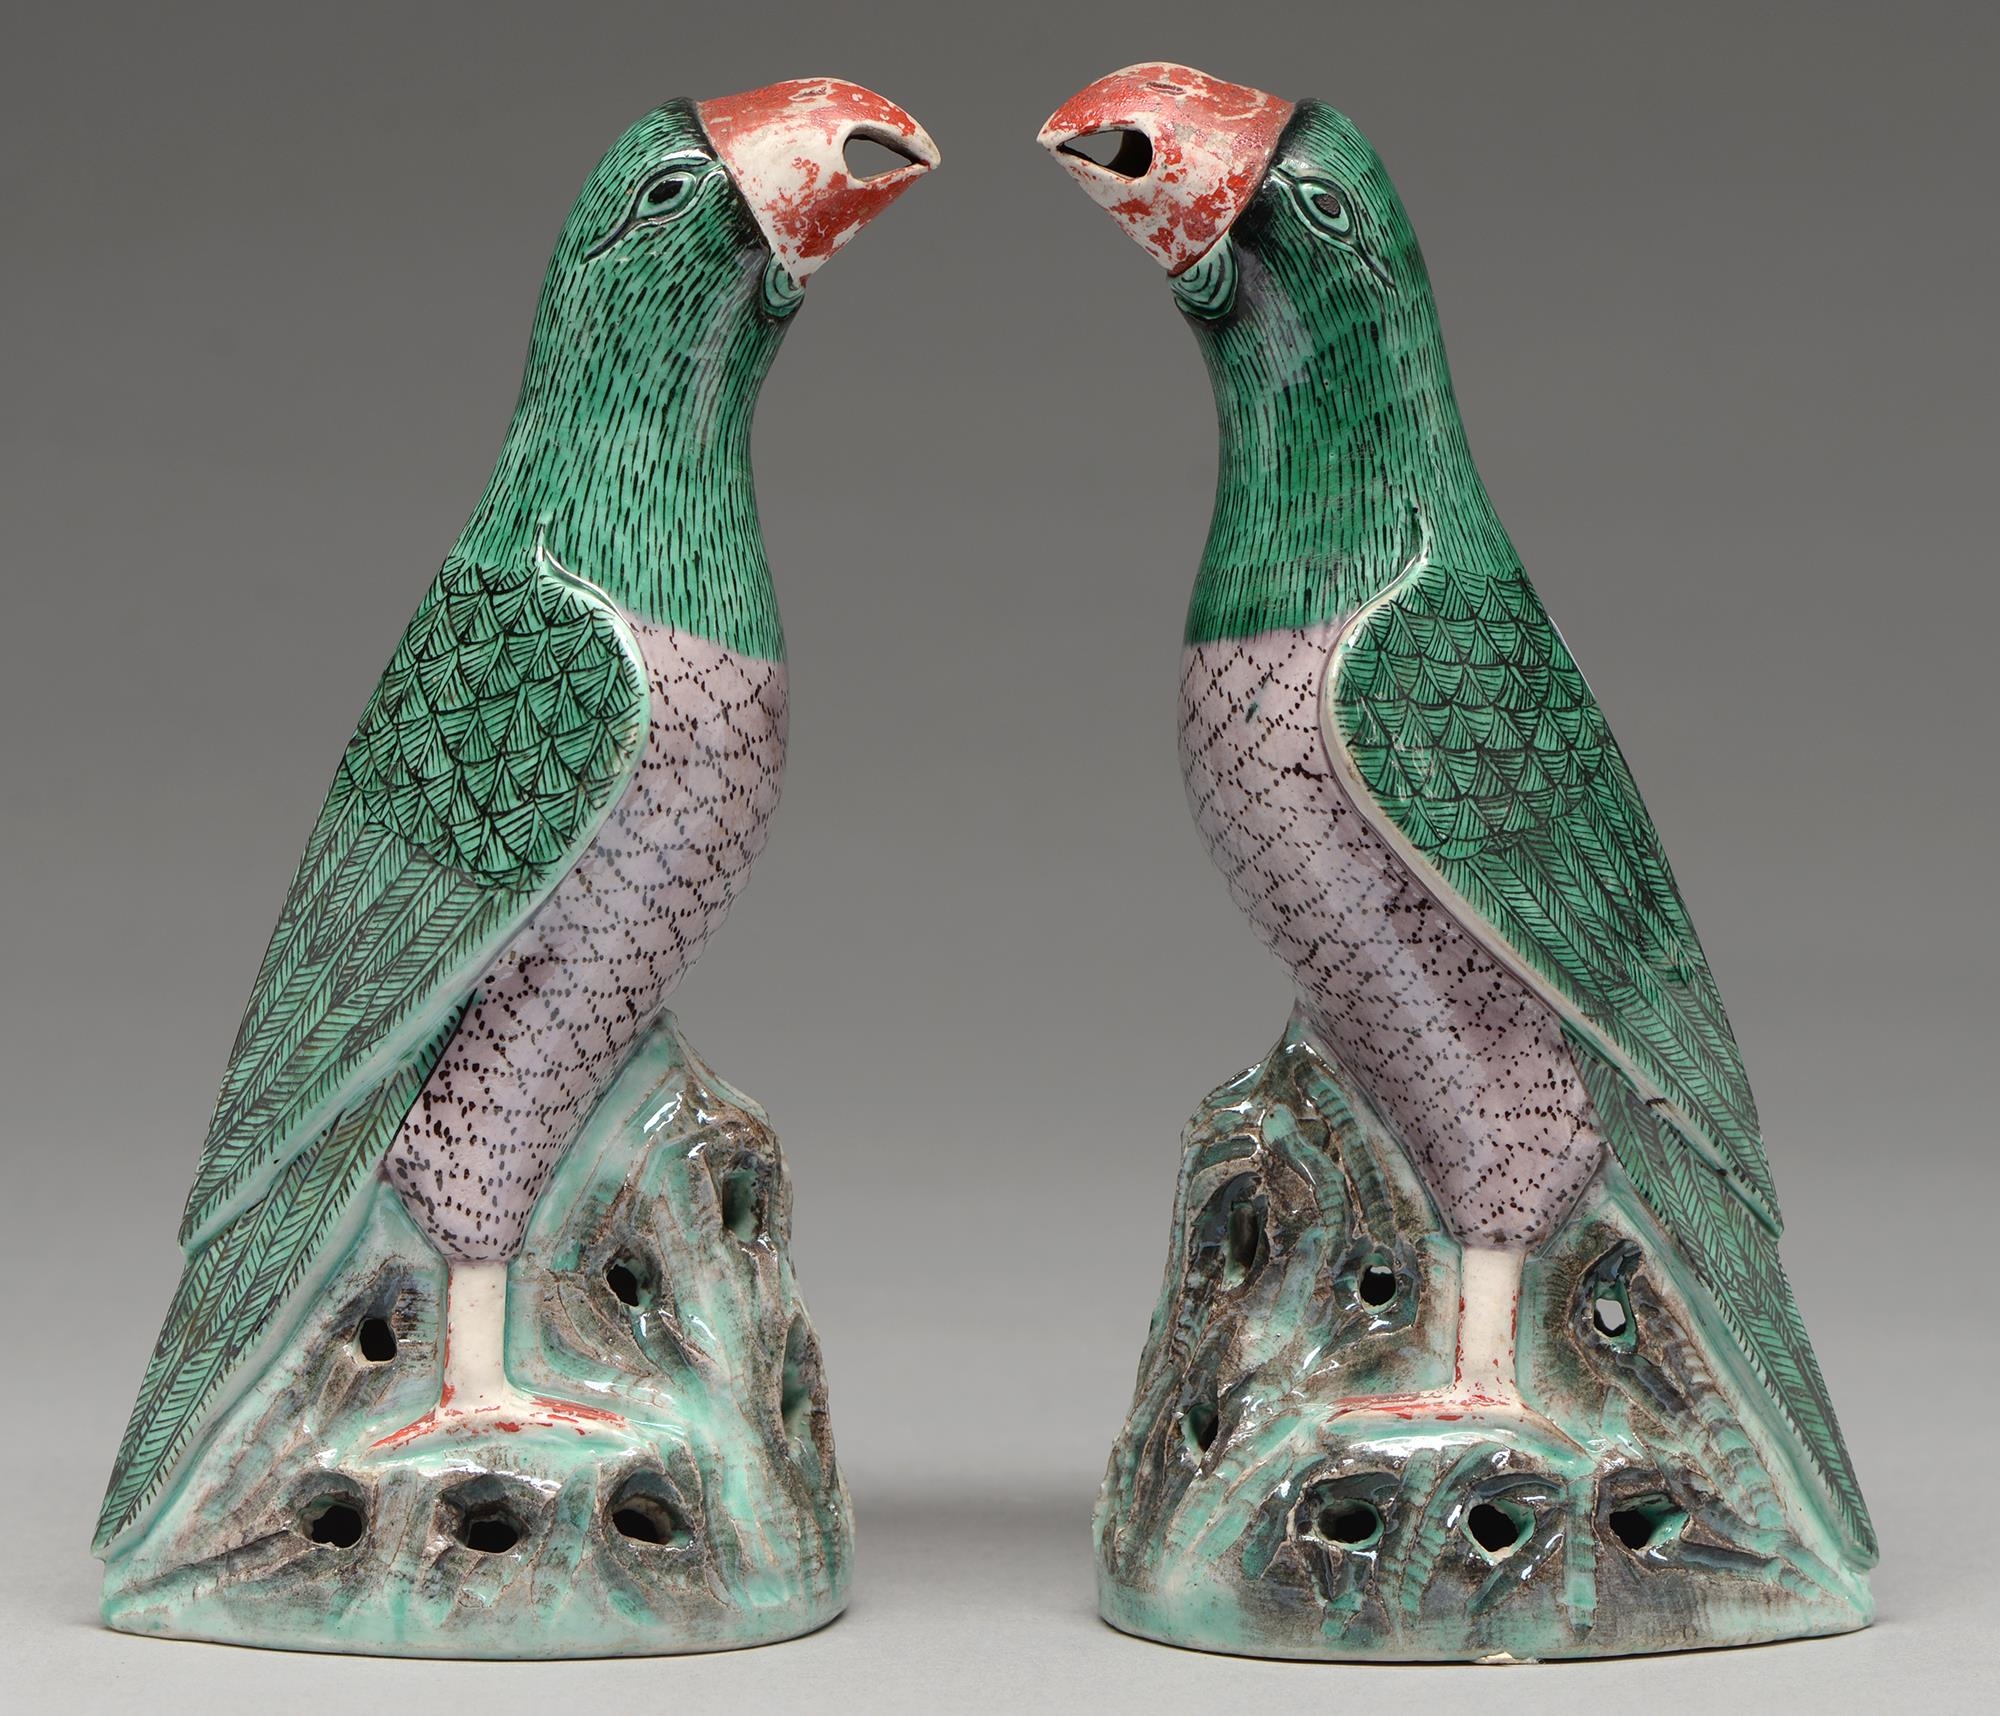 A pair of Chinese glazed biscuit models of parrots, 19th c in Kangxi style, with black eye and green